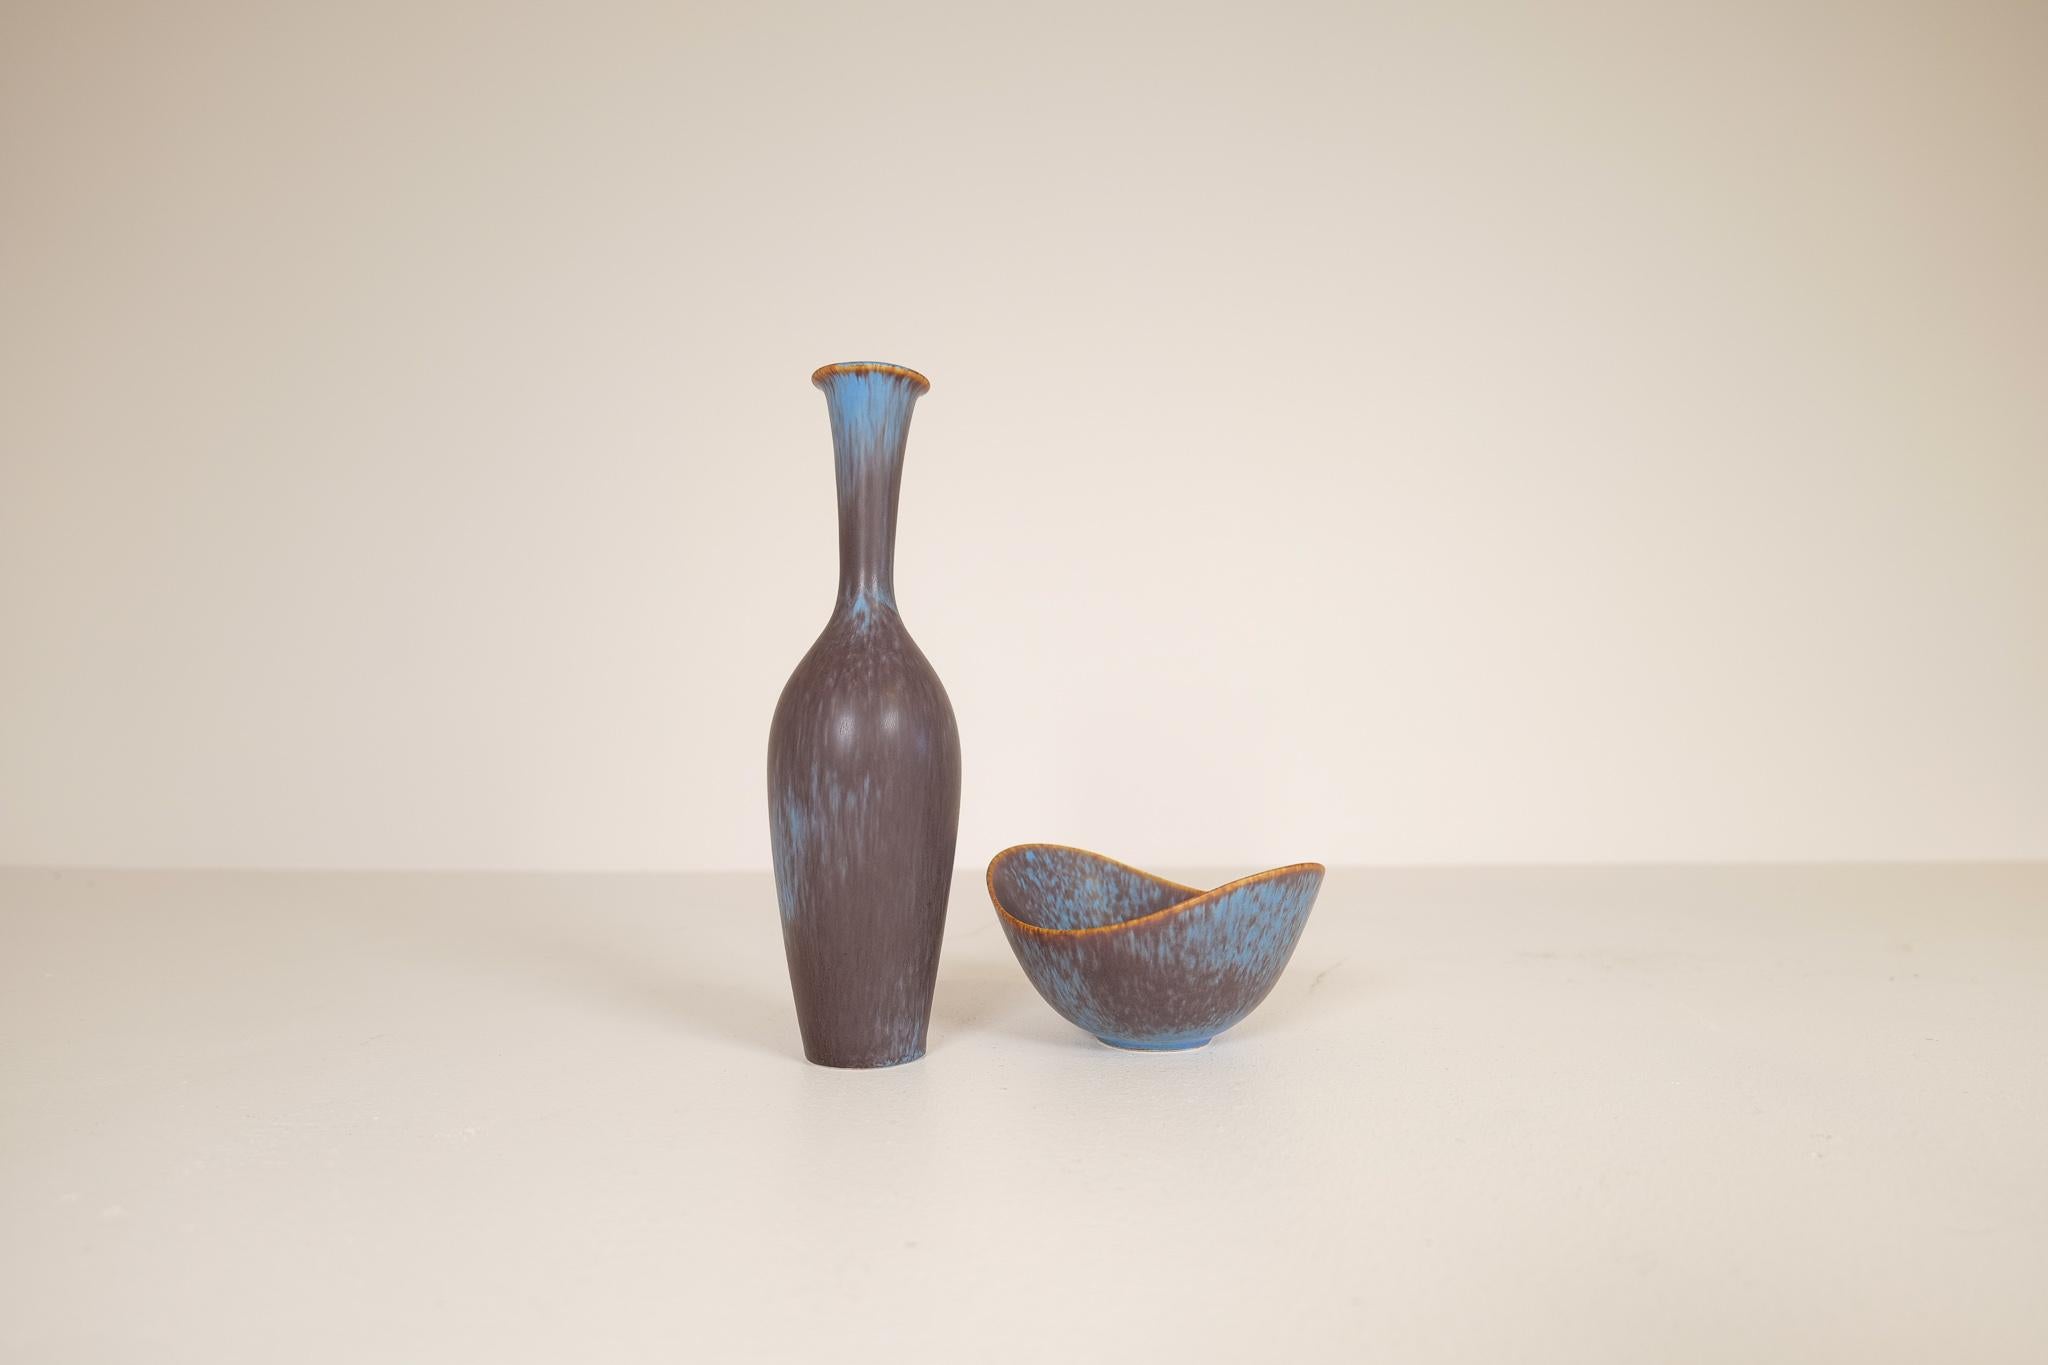 This wonderful large vase and bowl was created and designed by Gunnar Nylund at the Rörstrand Factory in the 1950s, Sweden.

The glaze is amazing and works wonderful with the bottleneck shaped vase and the wonderful, sculptured bowl. 

Very nice